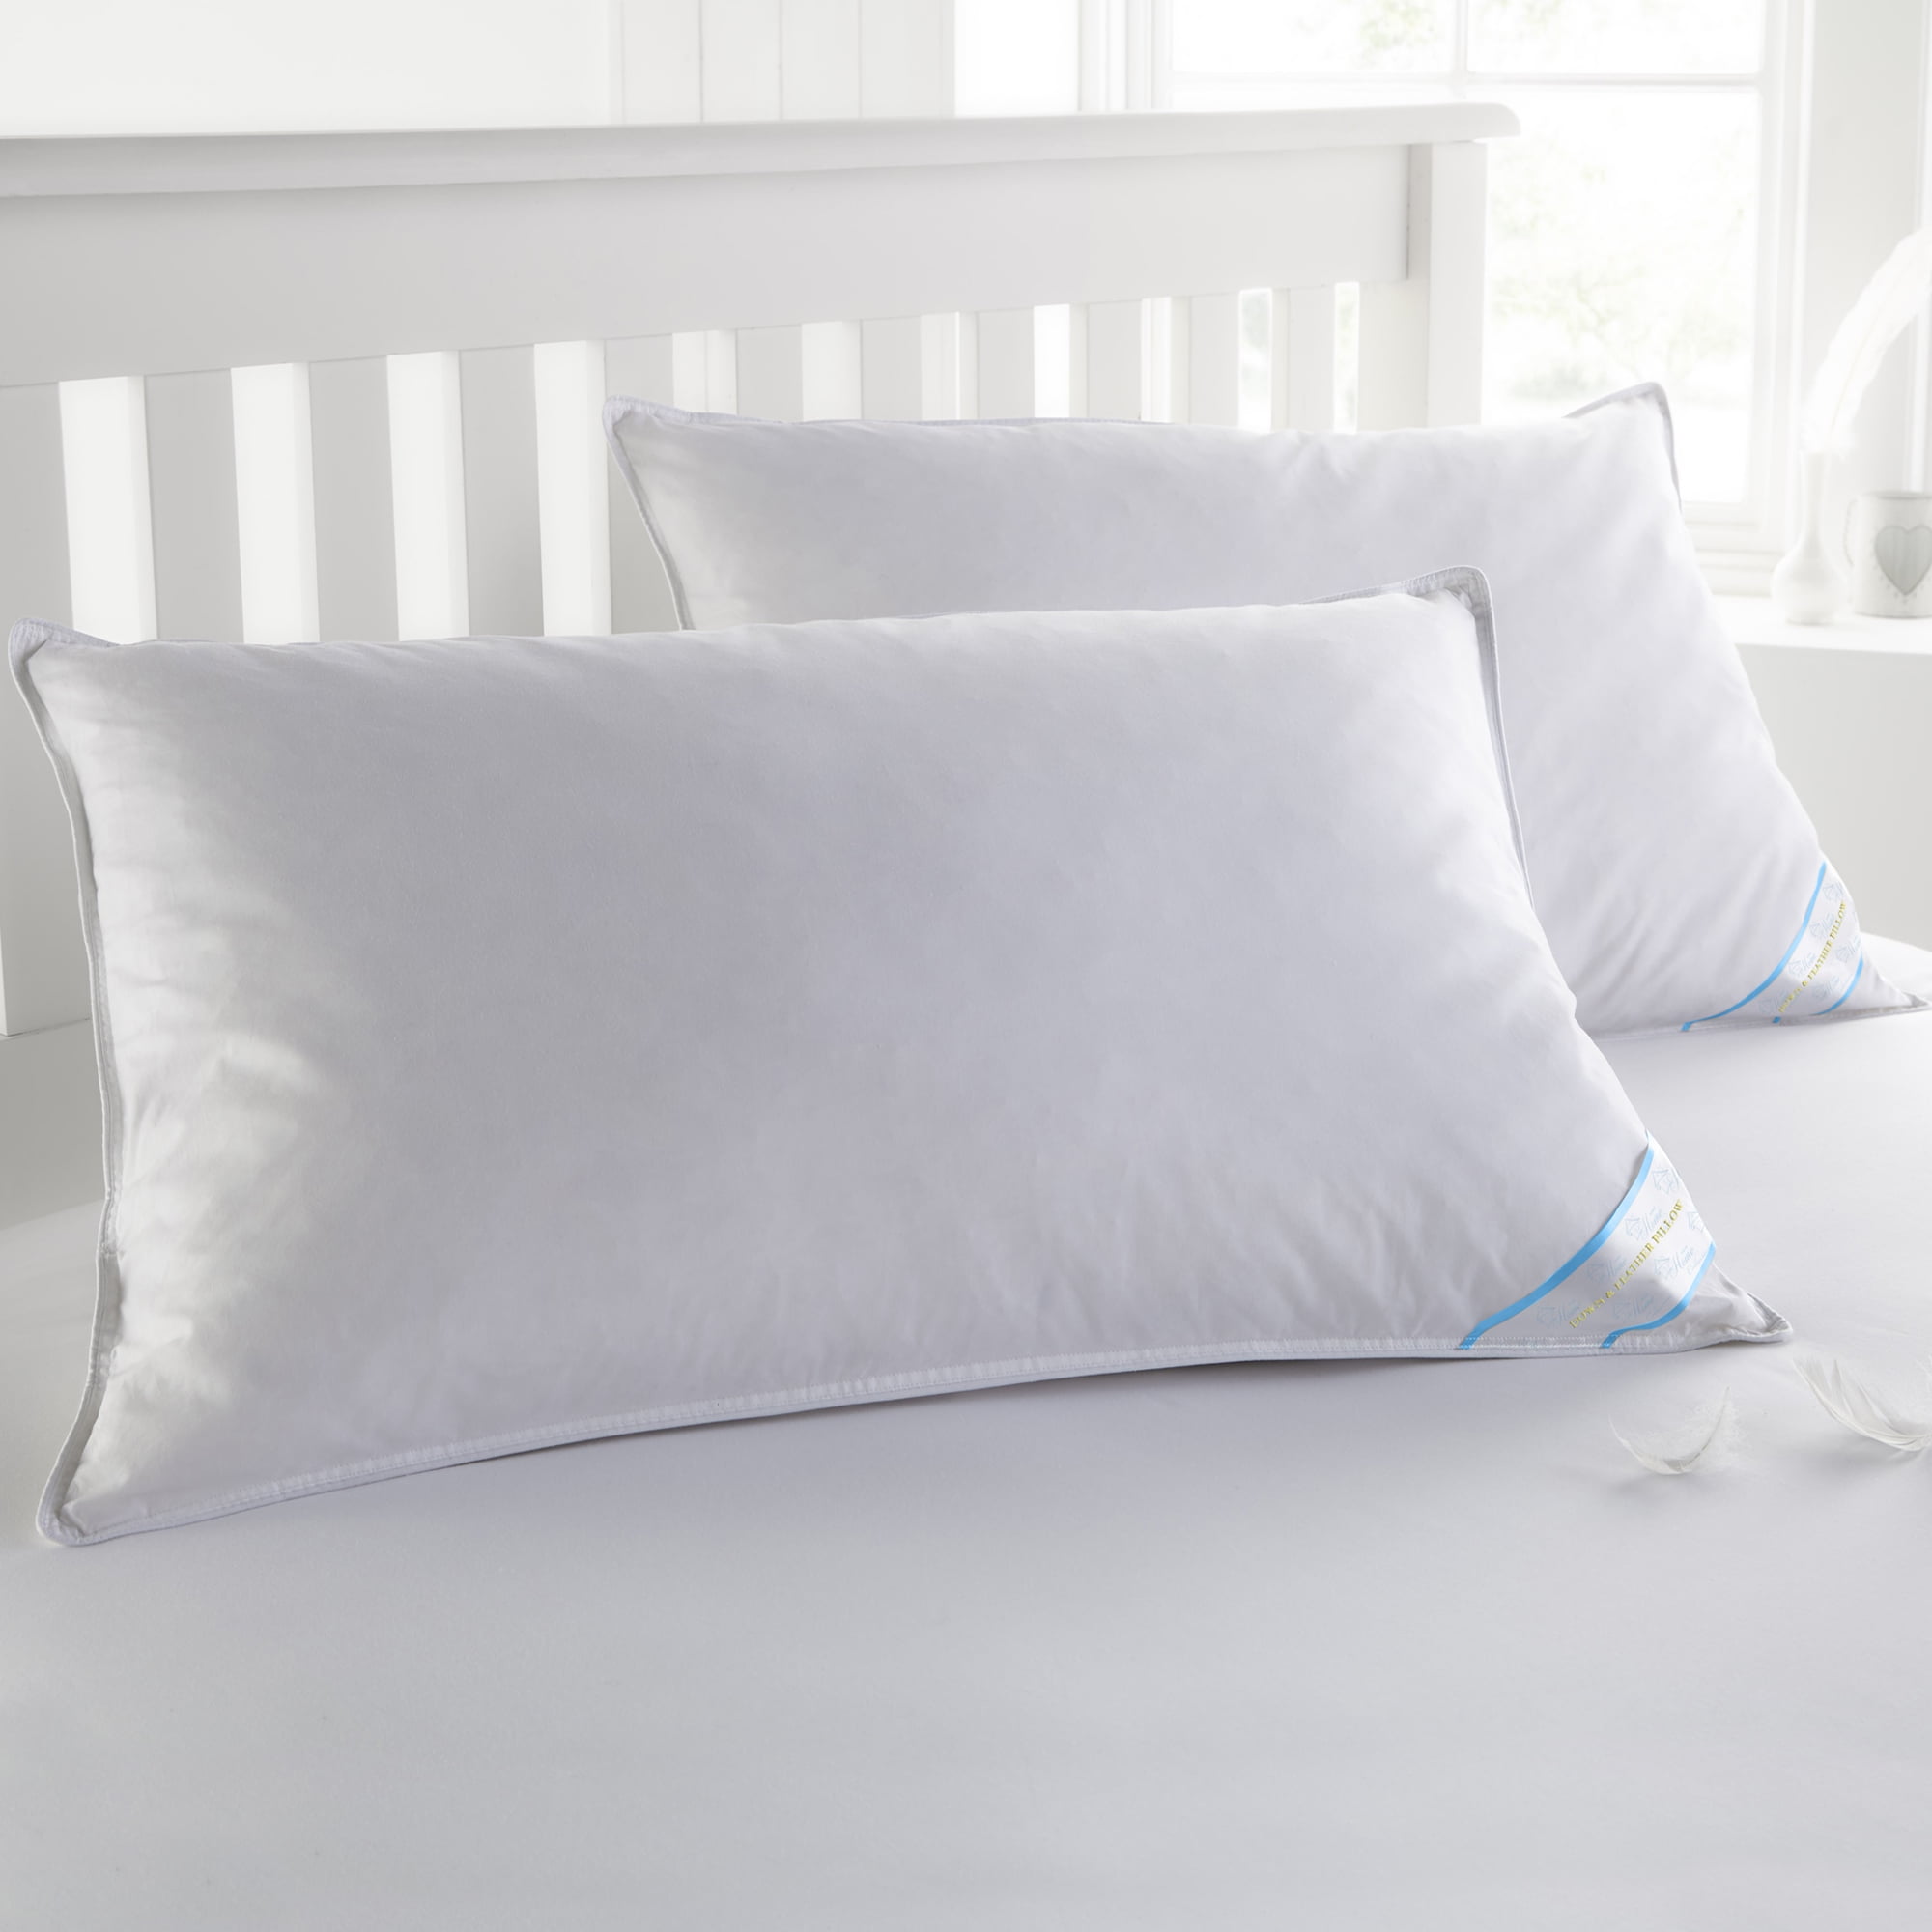 Puredown® 2 pack White Feather Pillow for Sleeping, Square Bed Pillows，18 x  18 inch, 20 x 20 inch